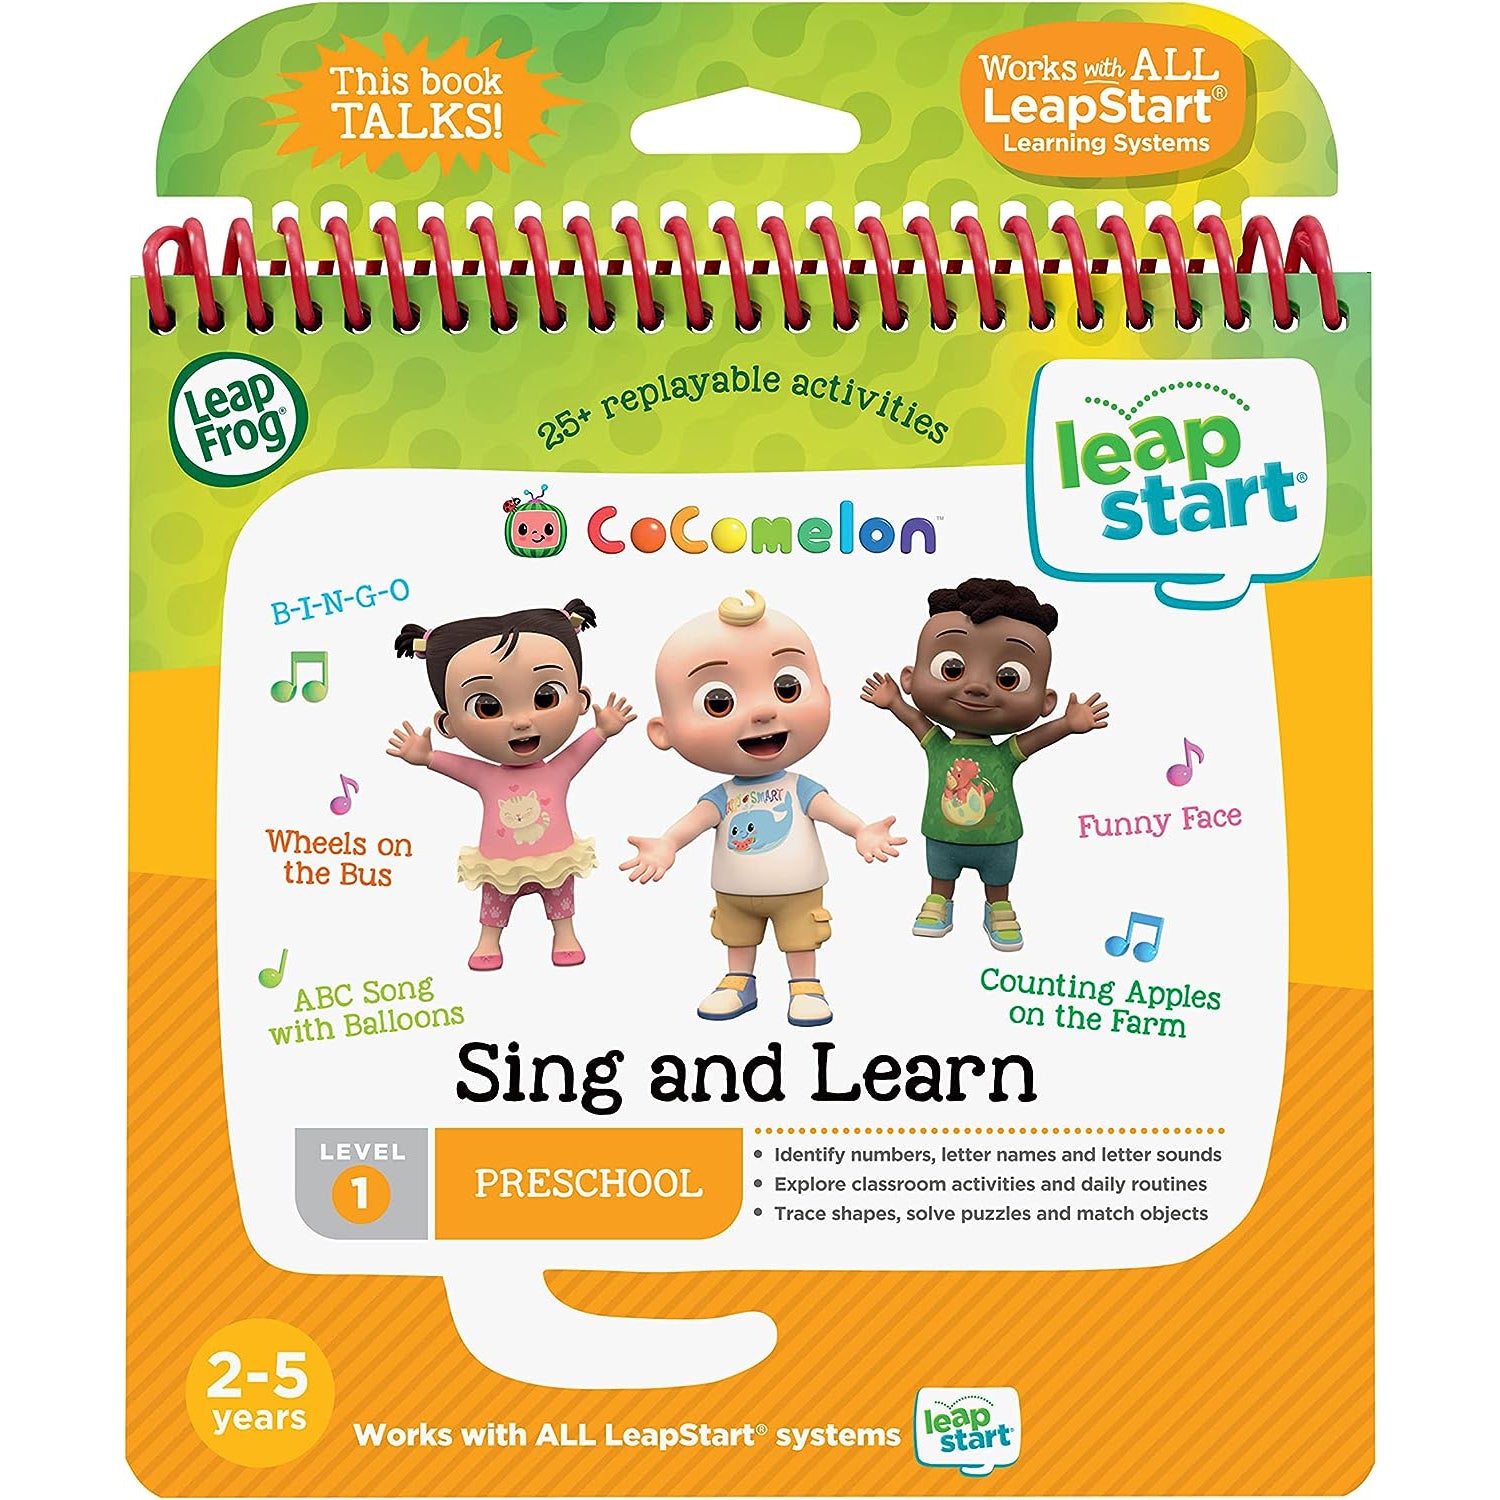 LeapFrog LeapStart Preschool (Level 1) CoComelon Sing and Learn Activity Book (English Version)